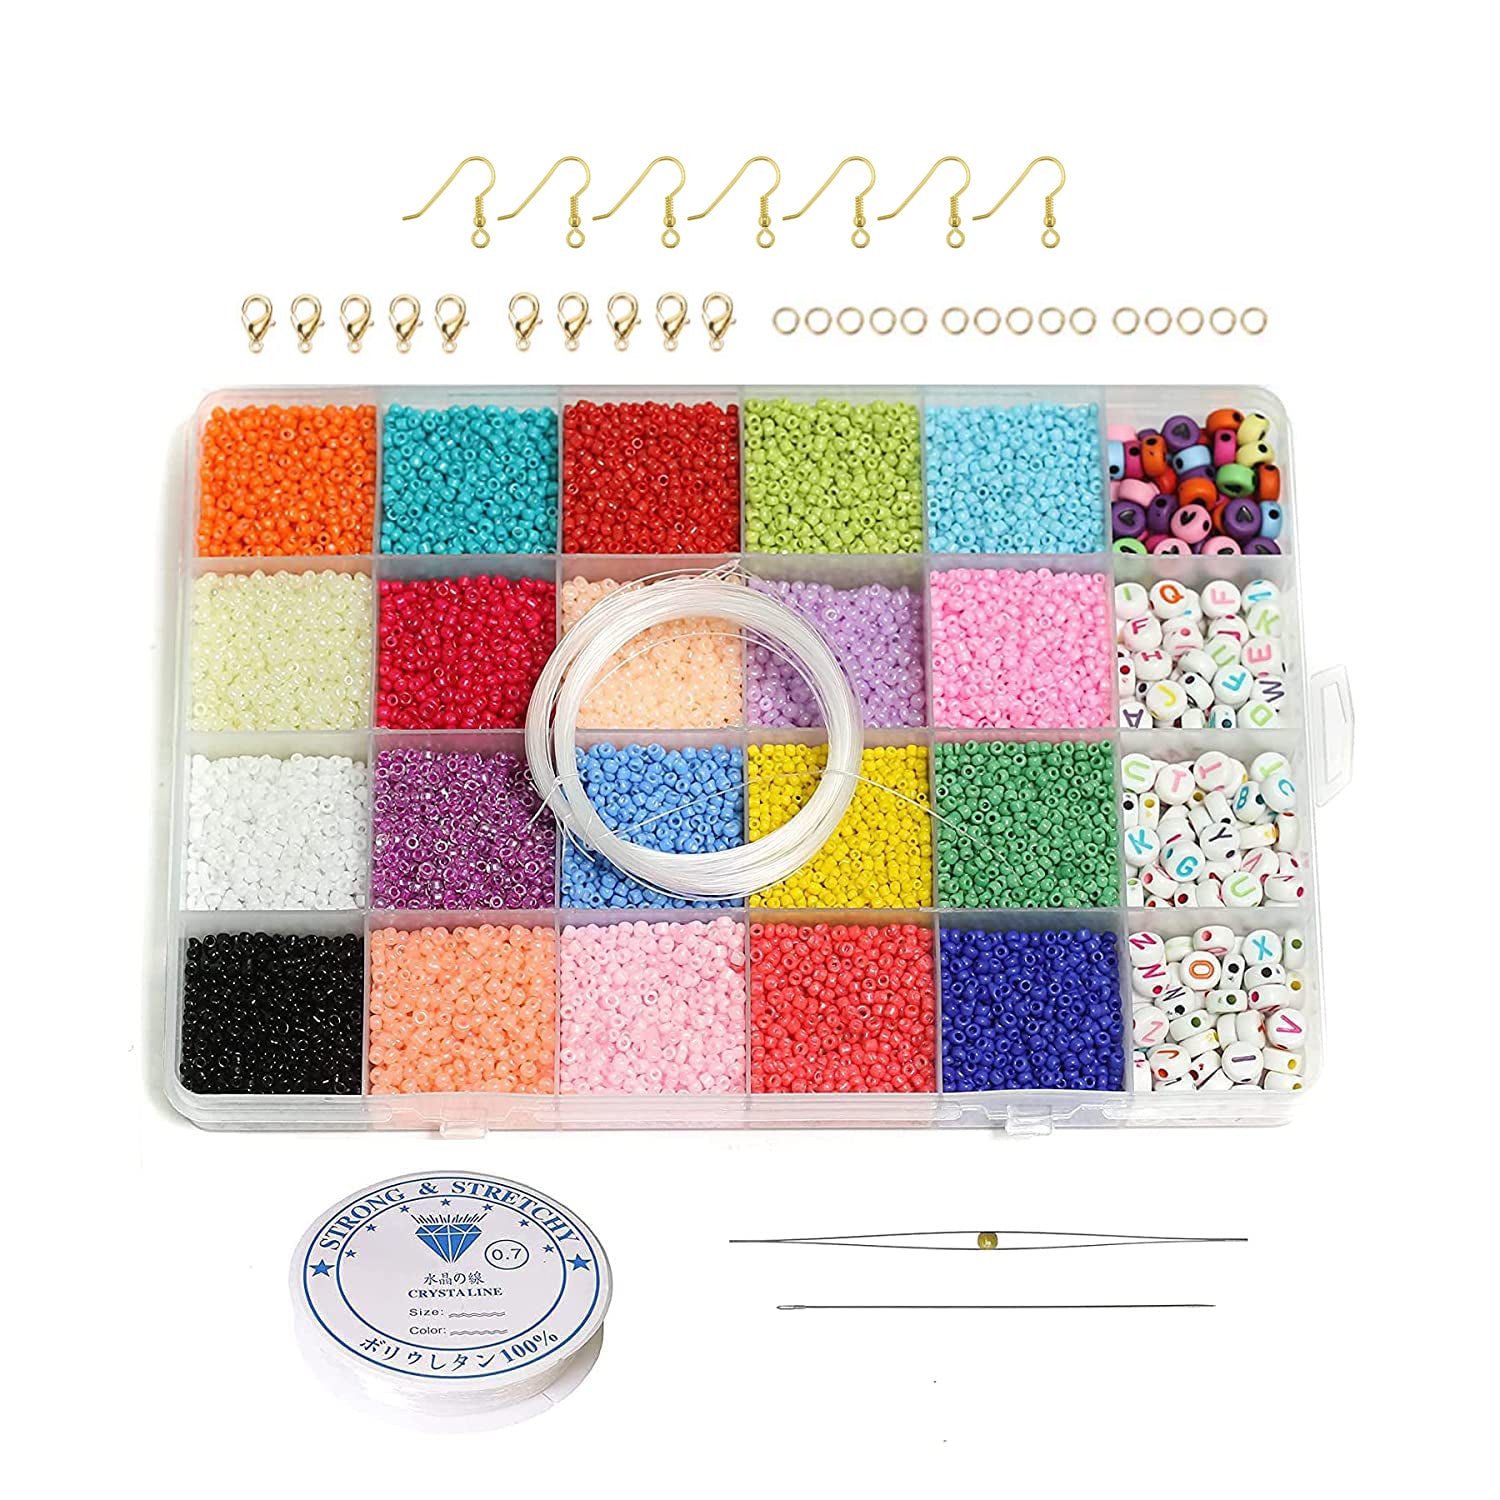 Glass Seed Beads 24 Colorful Seed Bead Kit with Letter Beads Heart Round  Beads and Beading